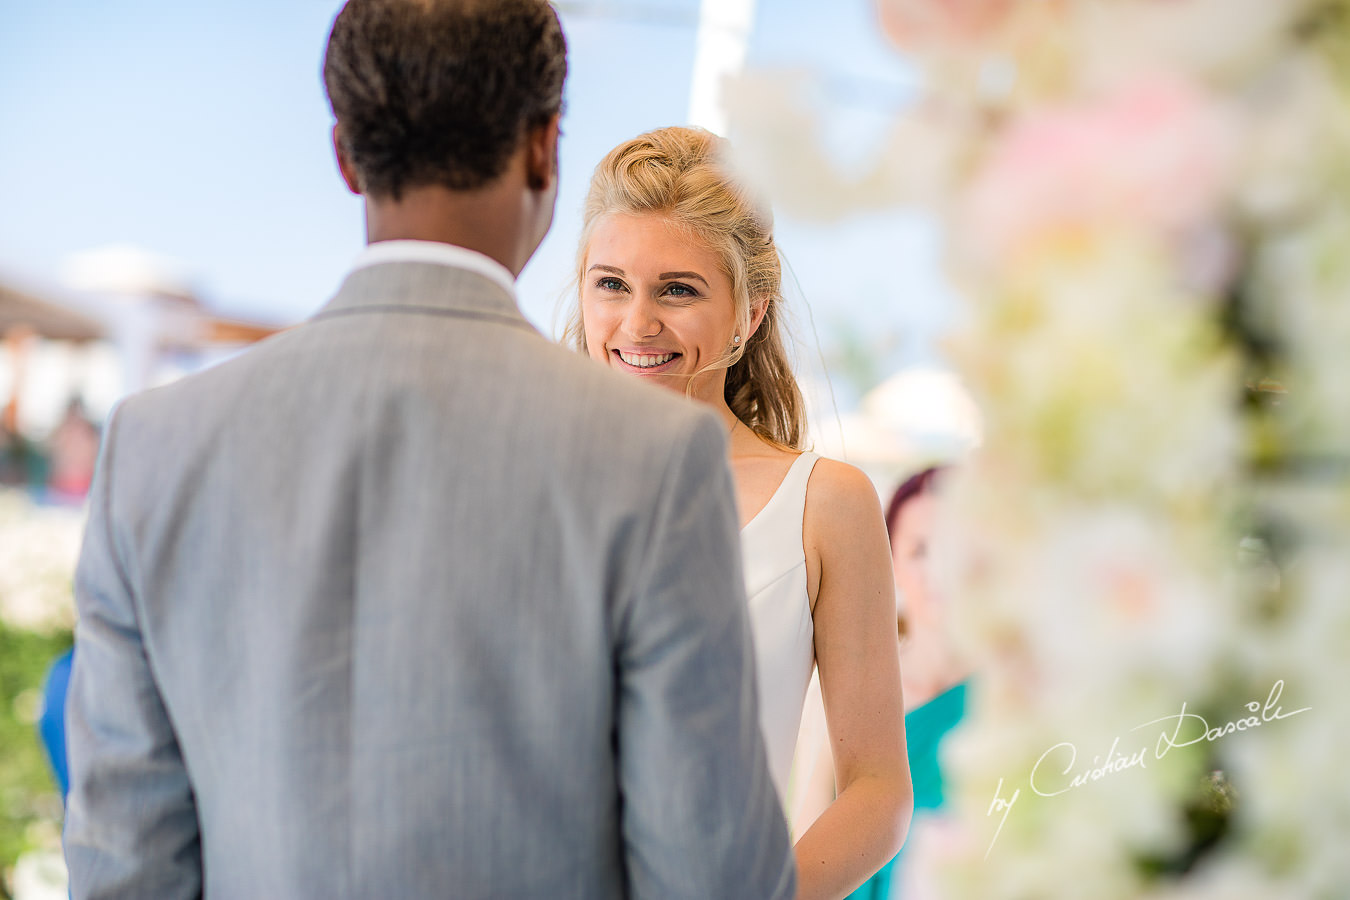 Exquisite Wedding at Asterias Beach Hotel. Photography by Cyprus Photographer Cristian Dascalu.